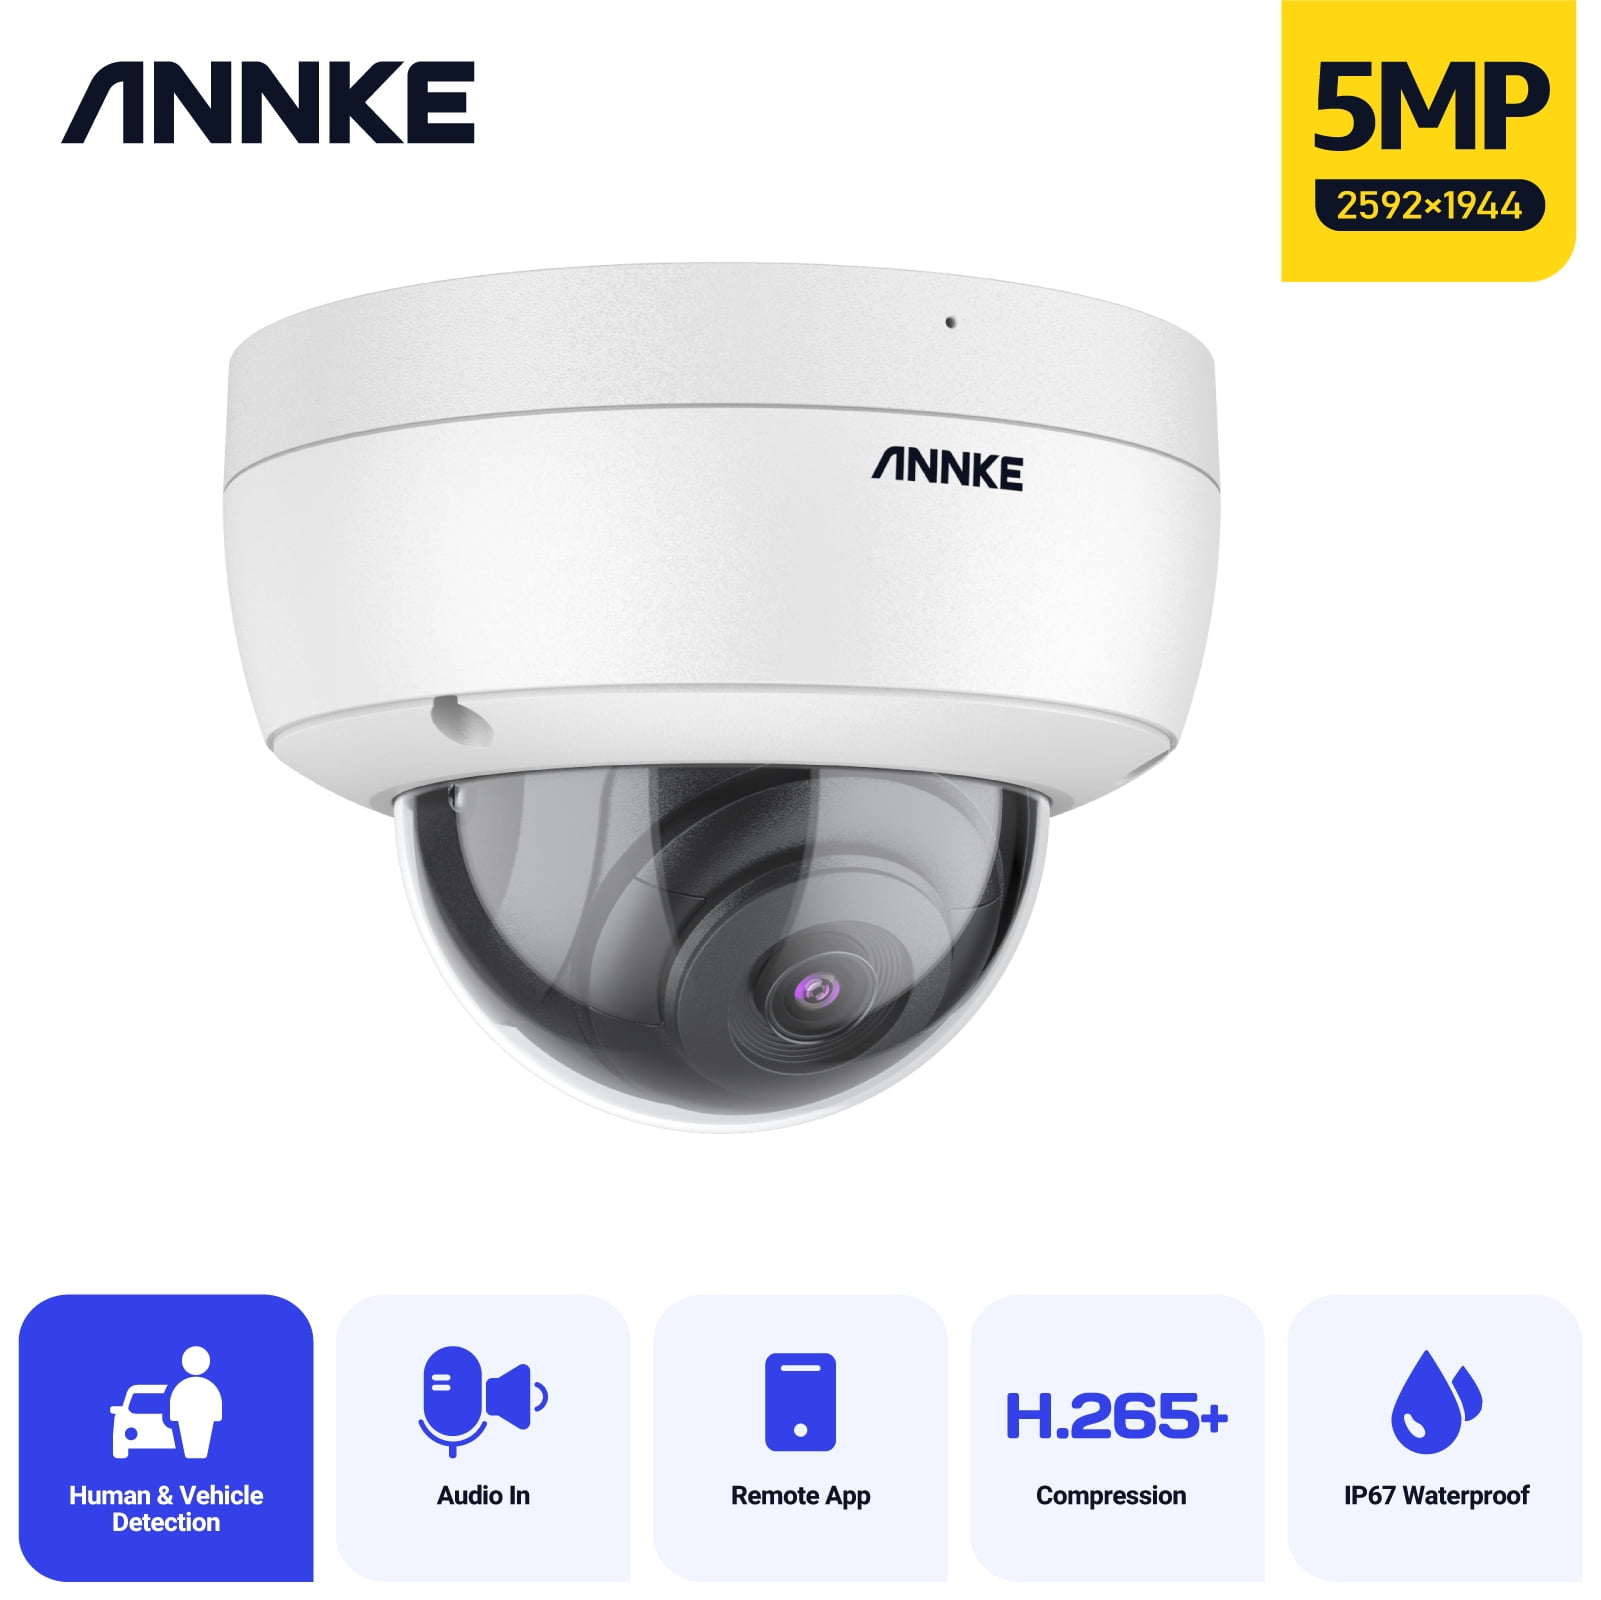 Pilfer Pillar Have learned ANNKE Dome 5MP Poe Security IP Camera Super HD H.265+ with 100 ft EXIR 2.0  Night Vision,120 dB WDR & 3D DNR,Support 256 GB TF Card,Remote Access  Built-in Mic,IP67 Weatherproof - Walmart.com